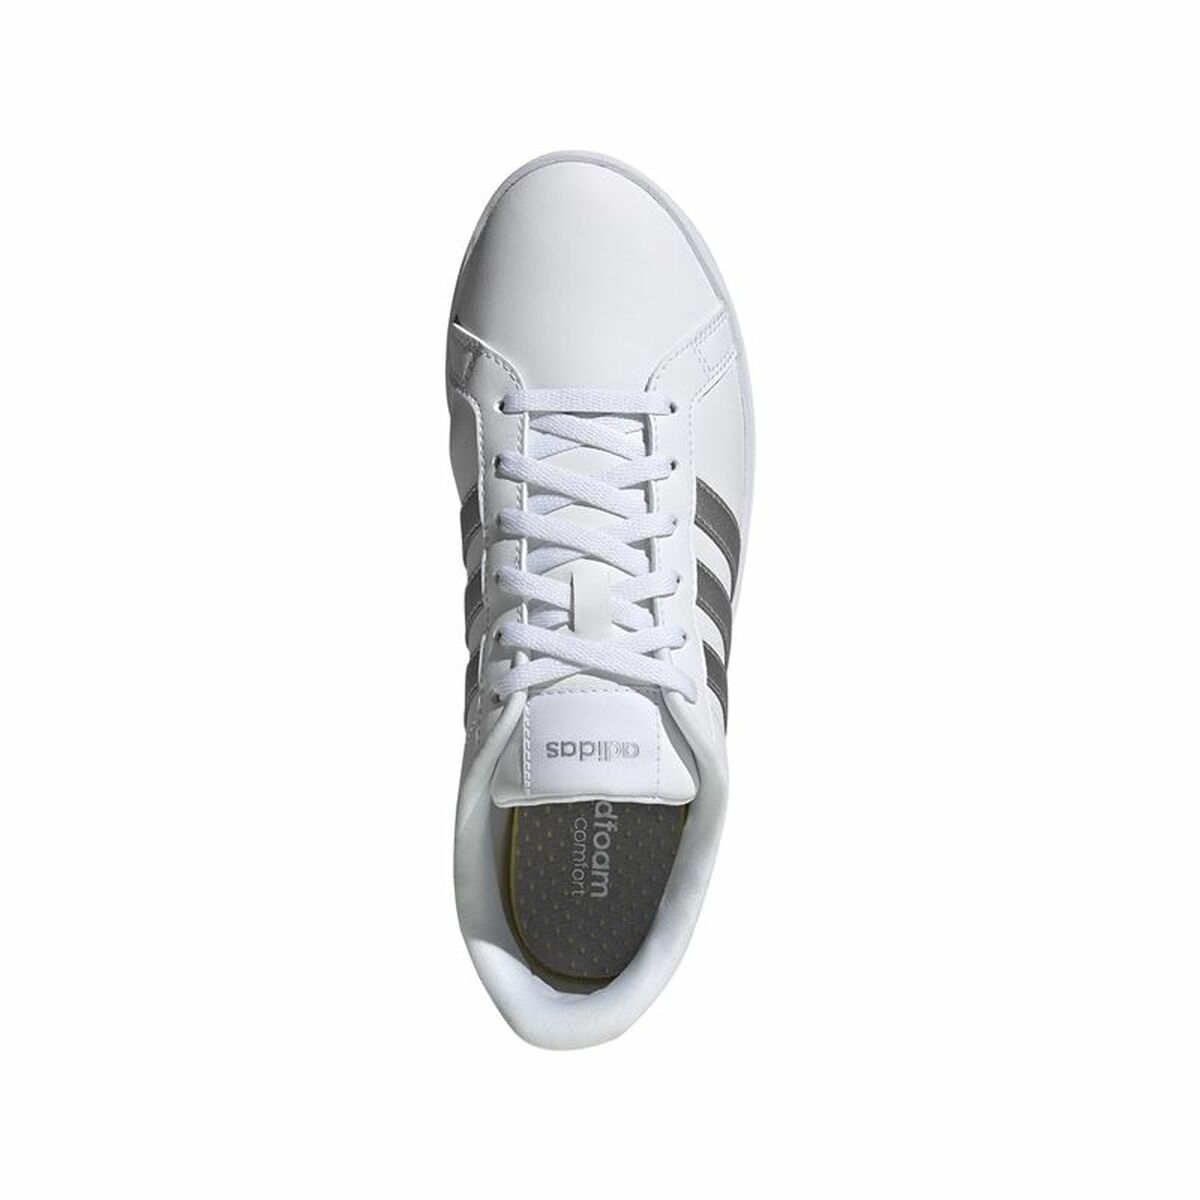 Sports Trainers for Women Adidas Courtpoint W Lady White